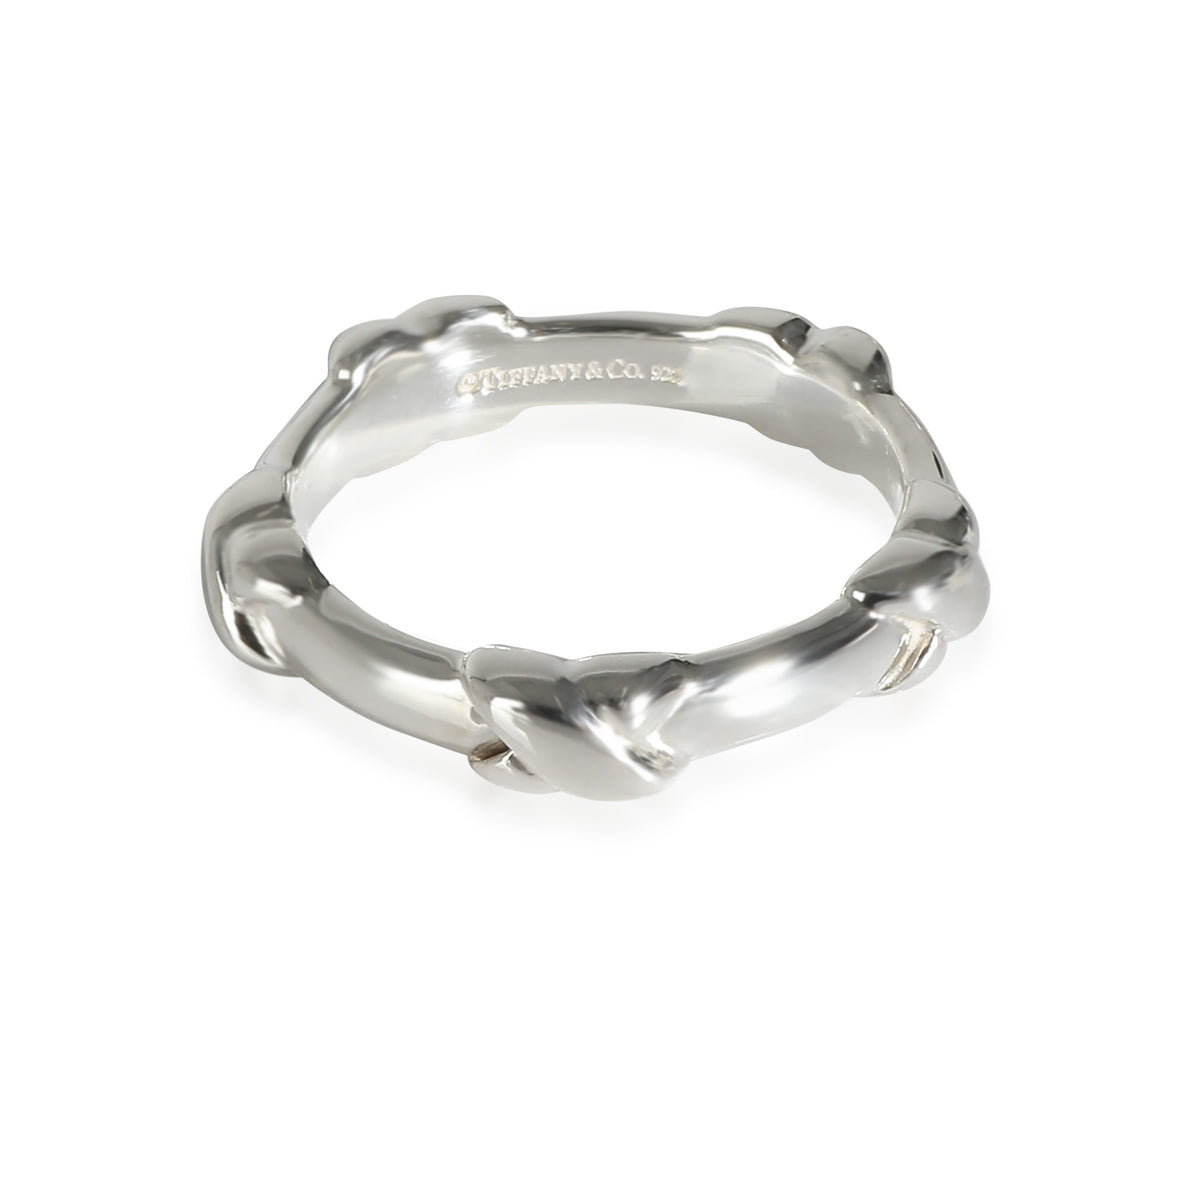 Signature X Station Band in Sterling Silver